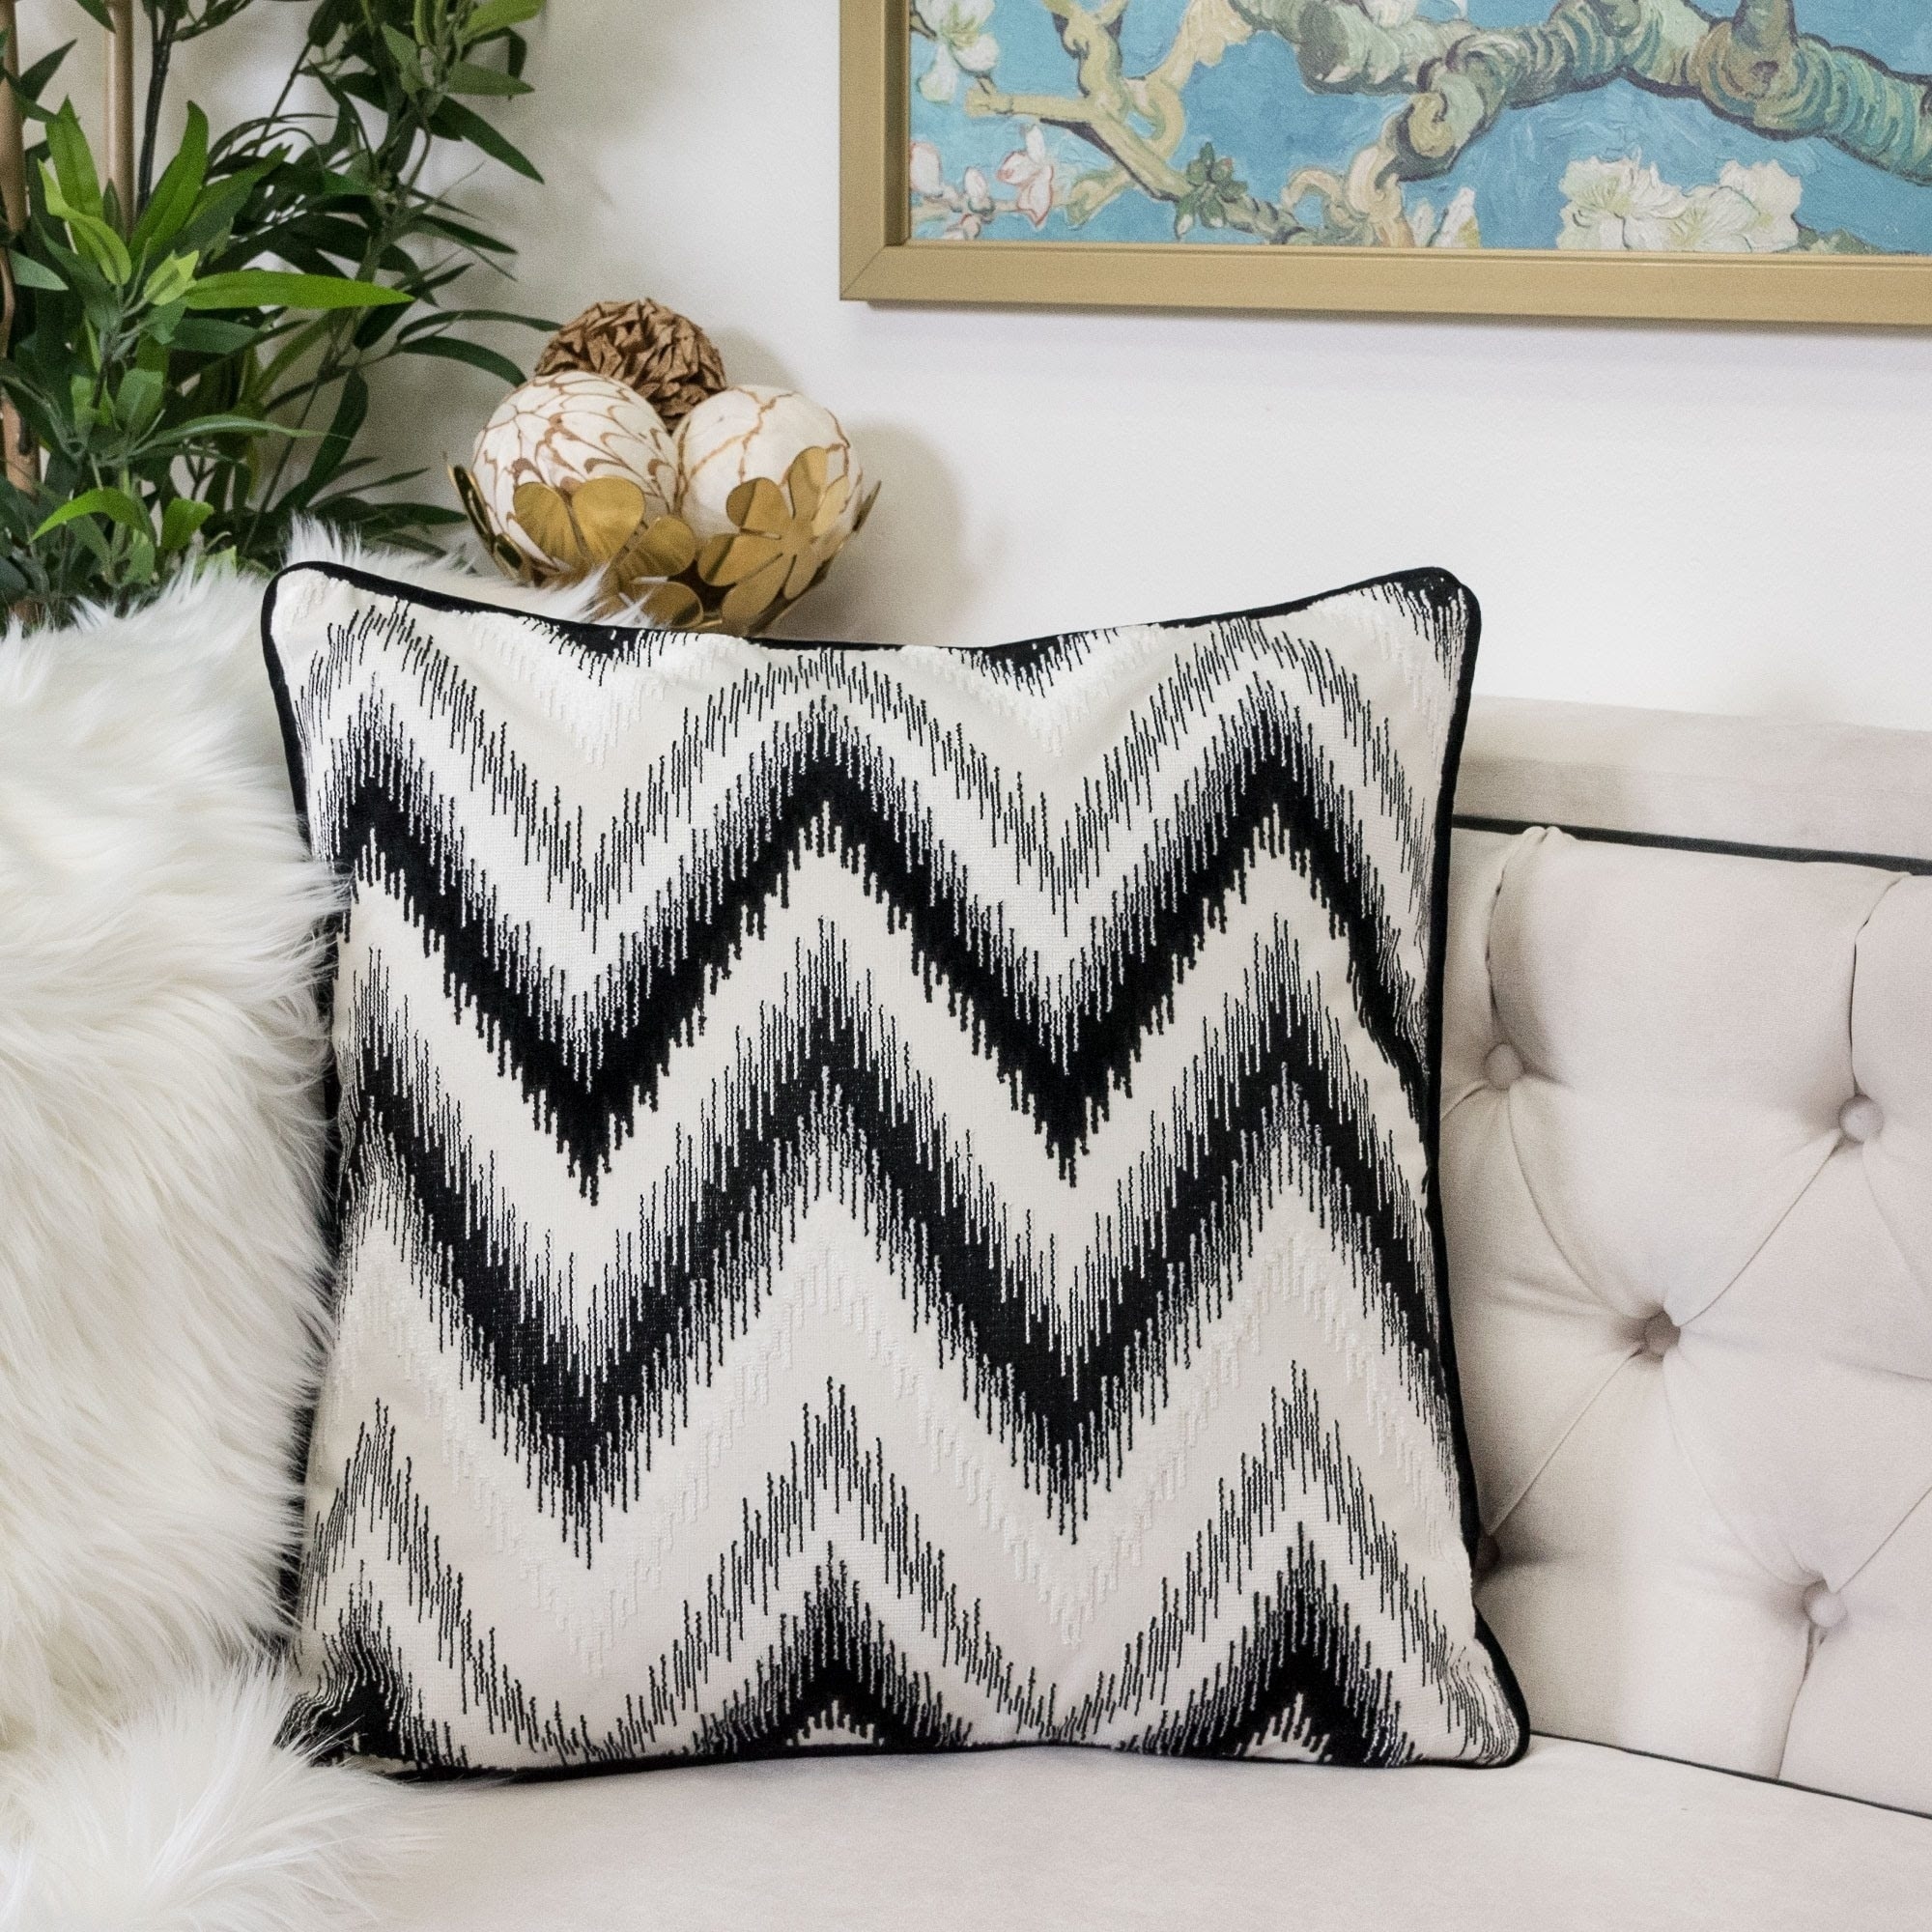 https://ak1.ostkcdn.com/images/products/30077357/Black-Series-Zig-Zag-Liner-Velvet-Large-Sofa-Couch-Pillow-619ce618-9615-472c-8cff-db3dbe8e9a82.jpg